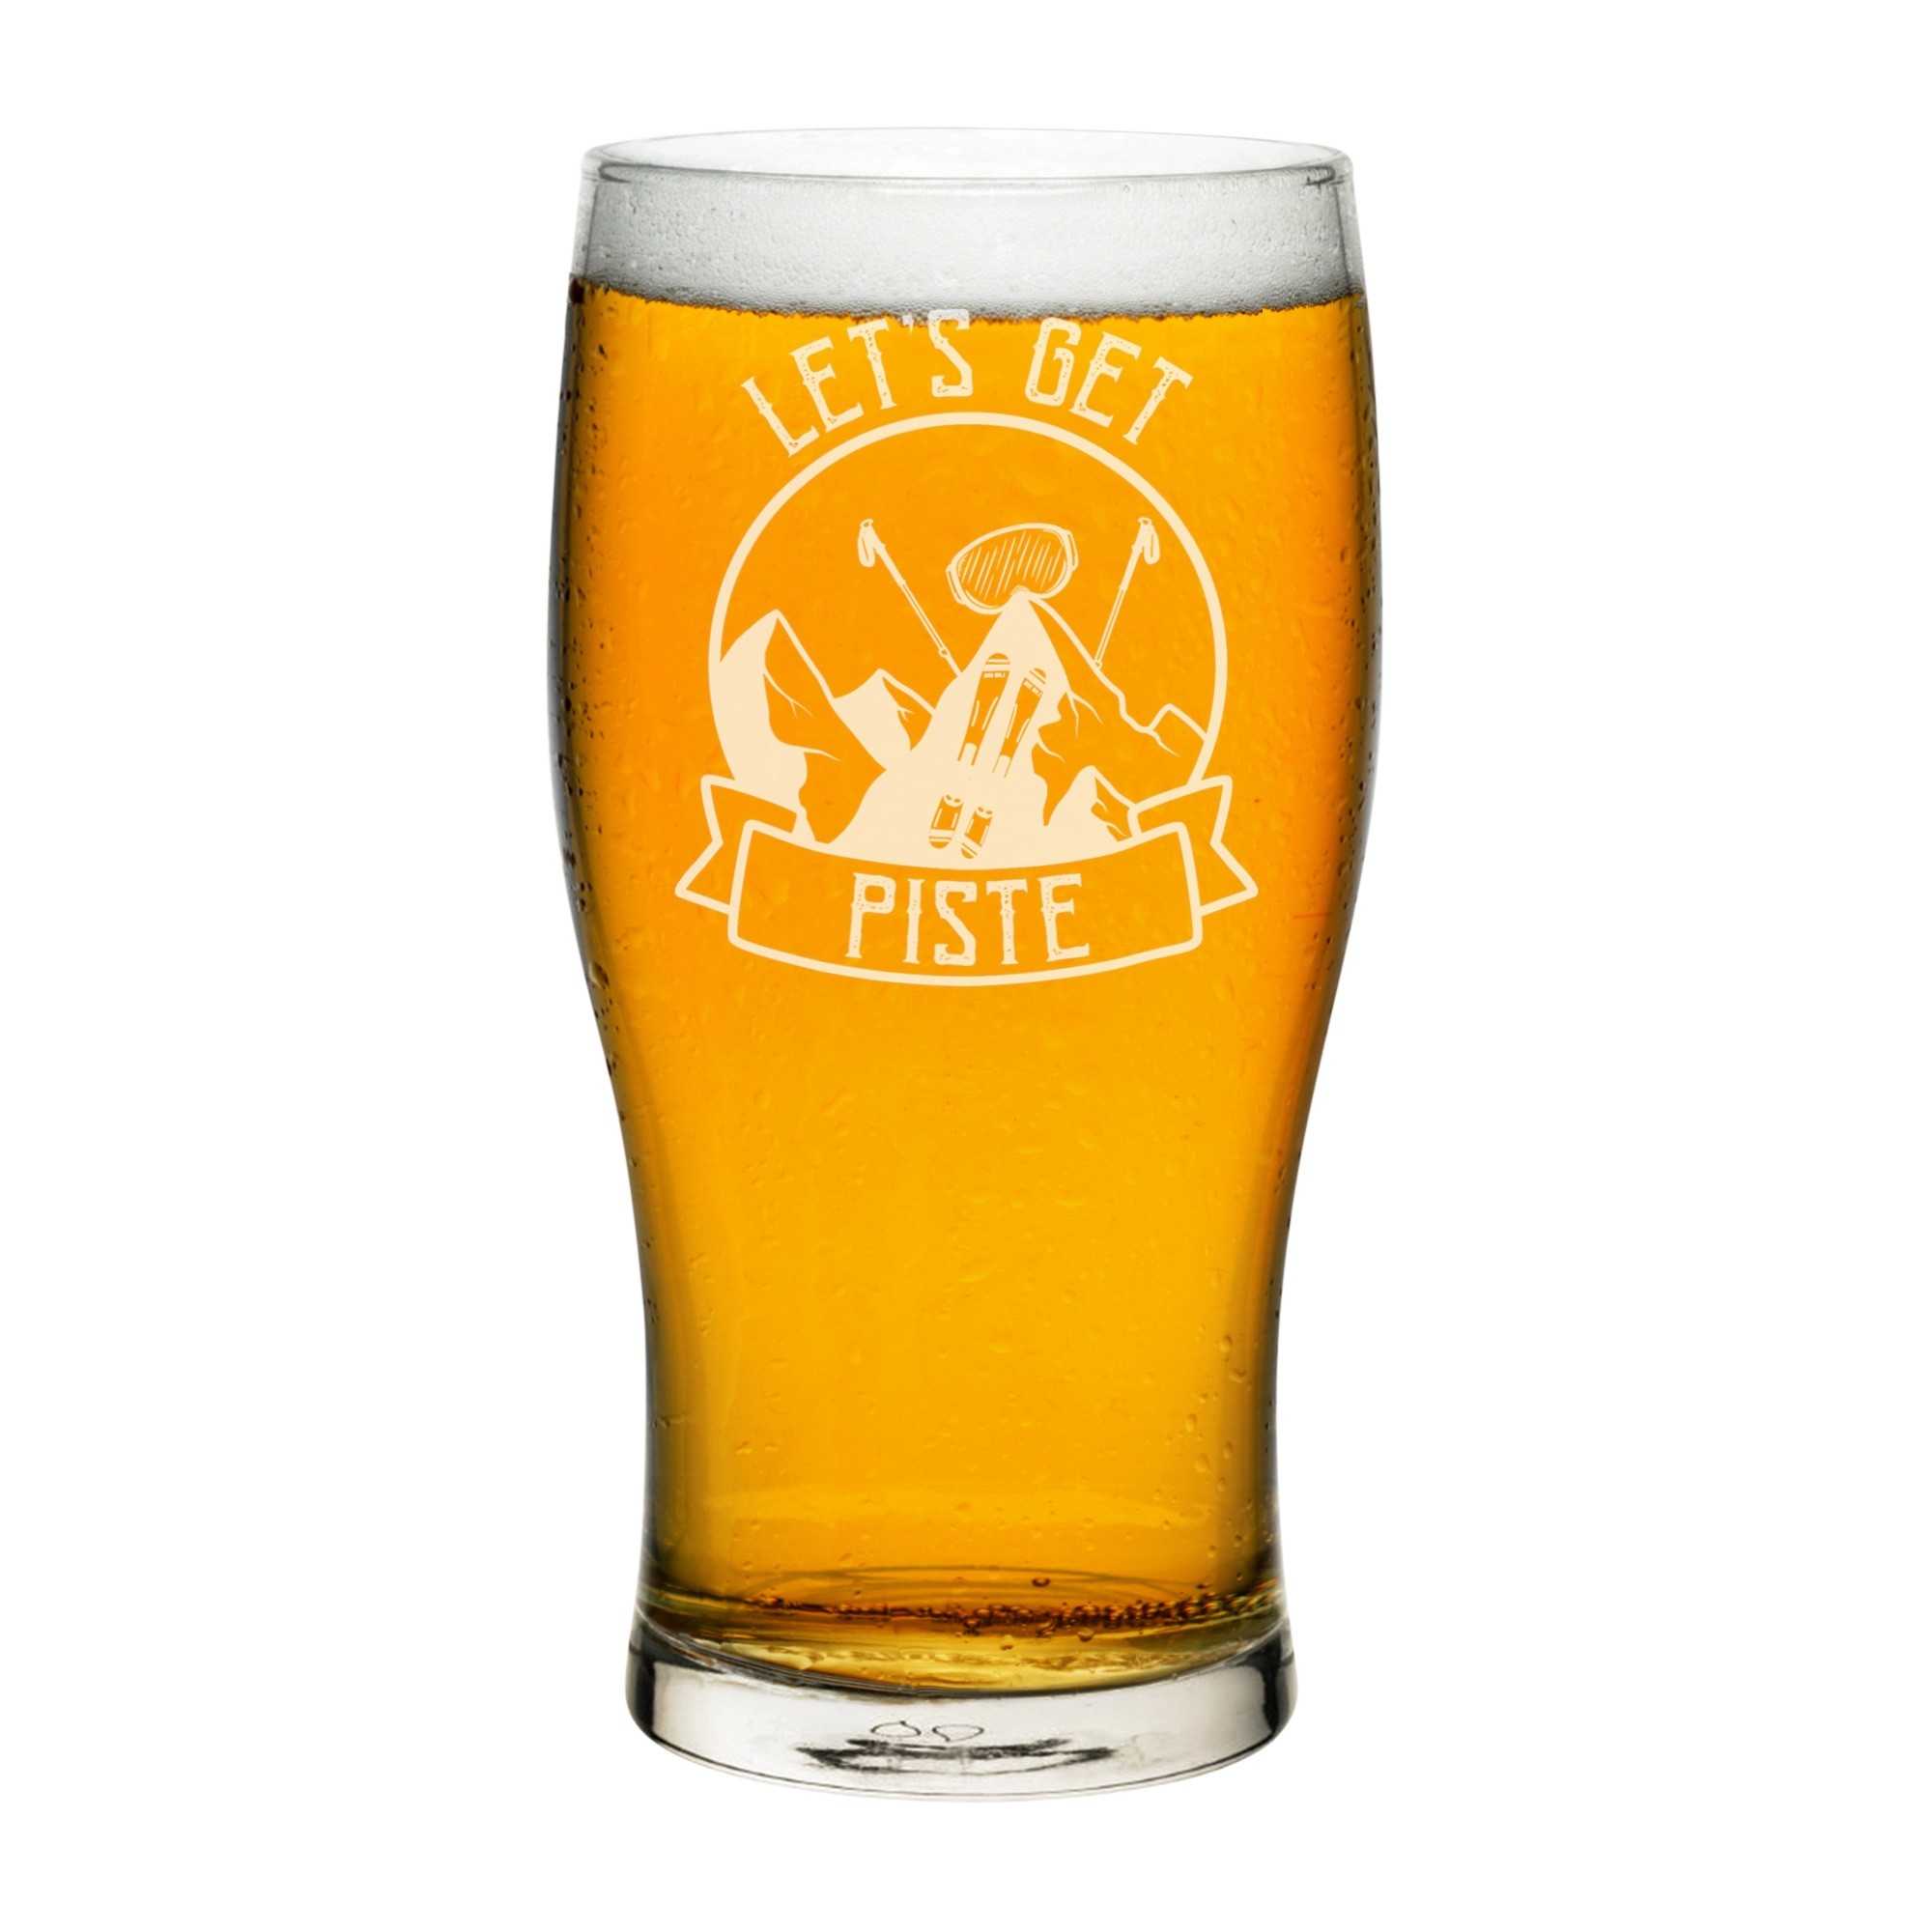 Let's Get Piste Pissed Skiing Pint Glass Tulip Any Name Craft Beer Cider Custom